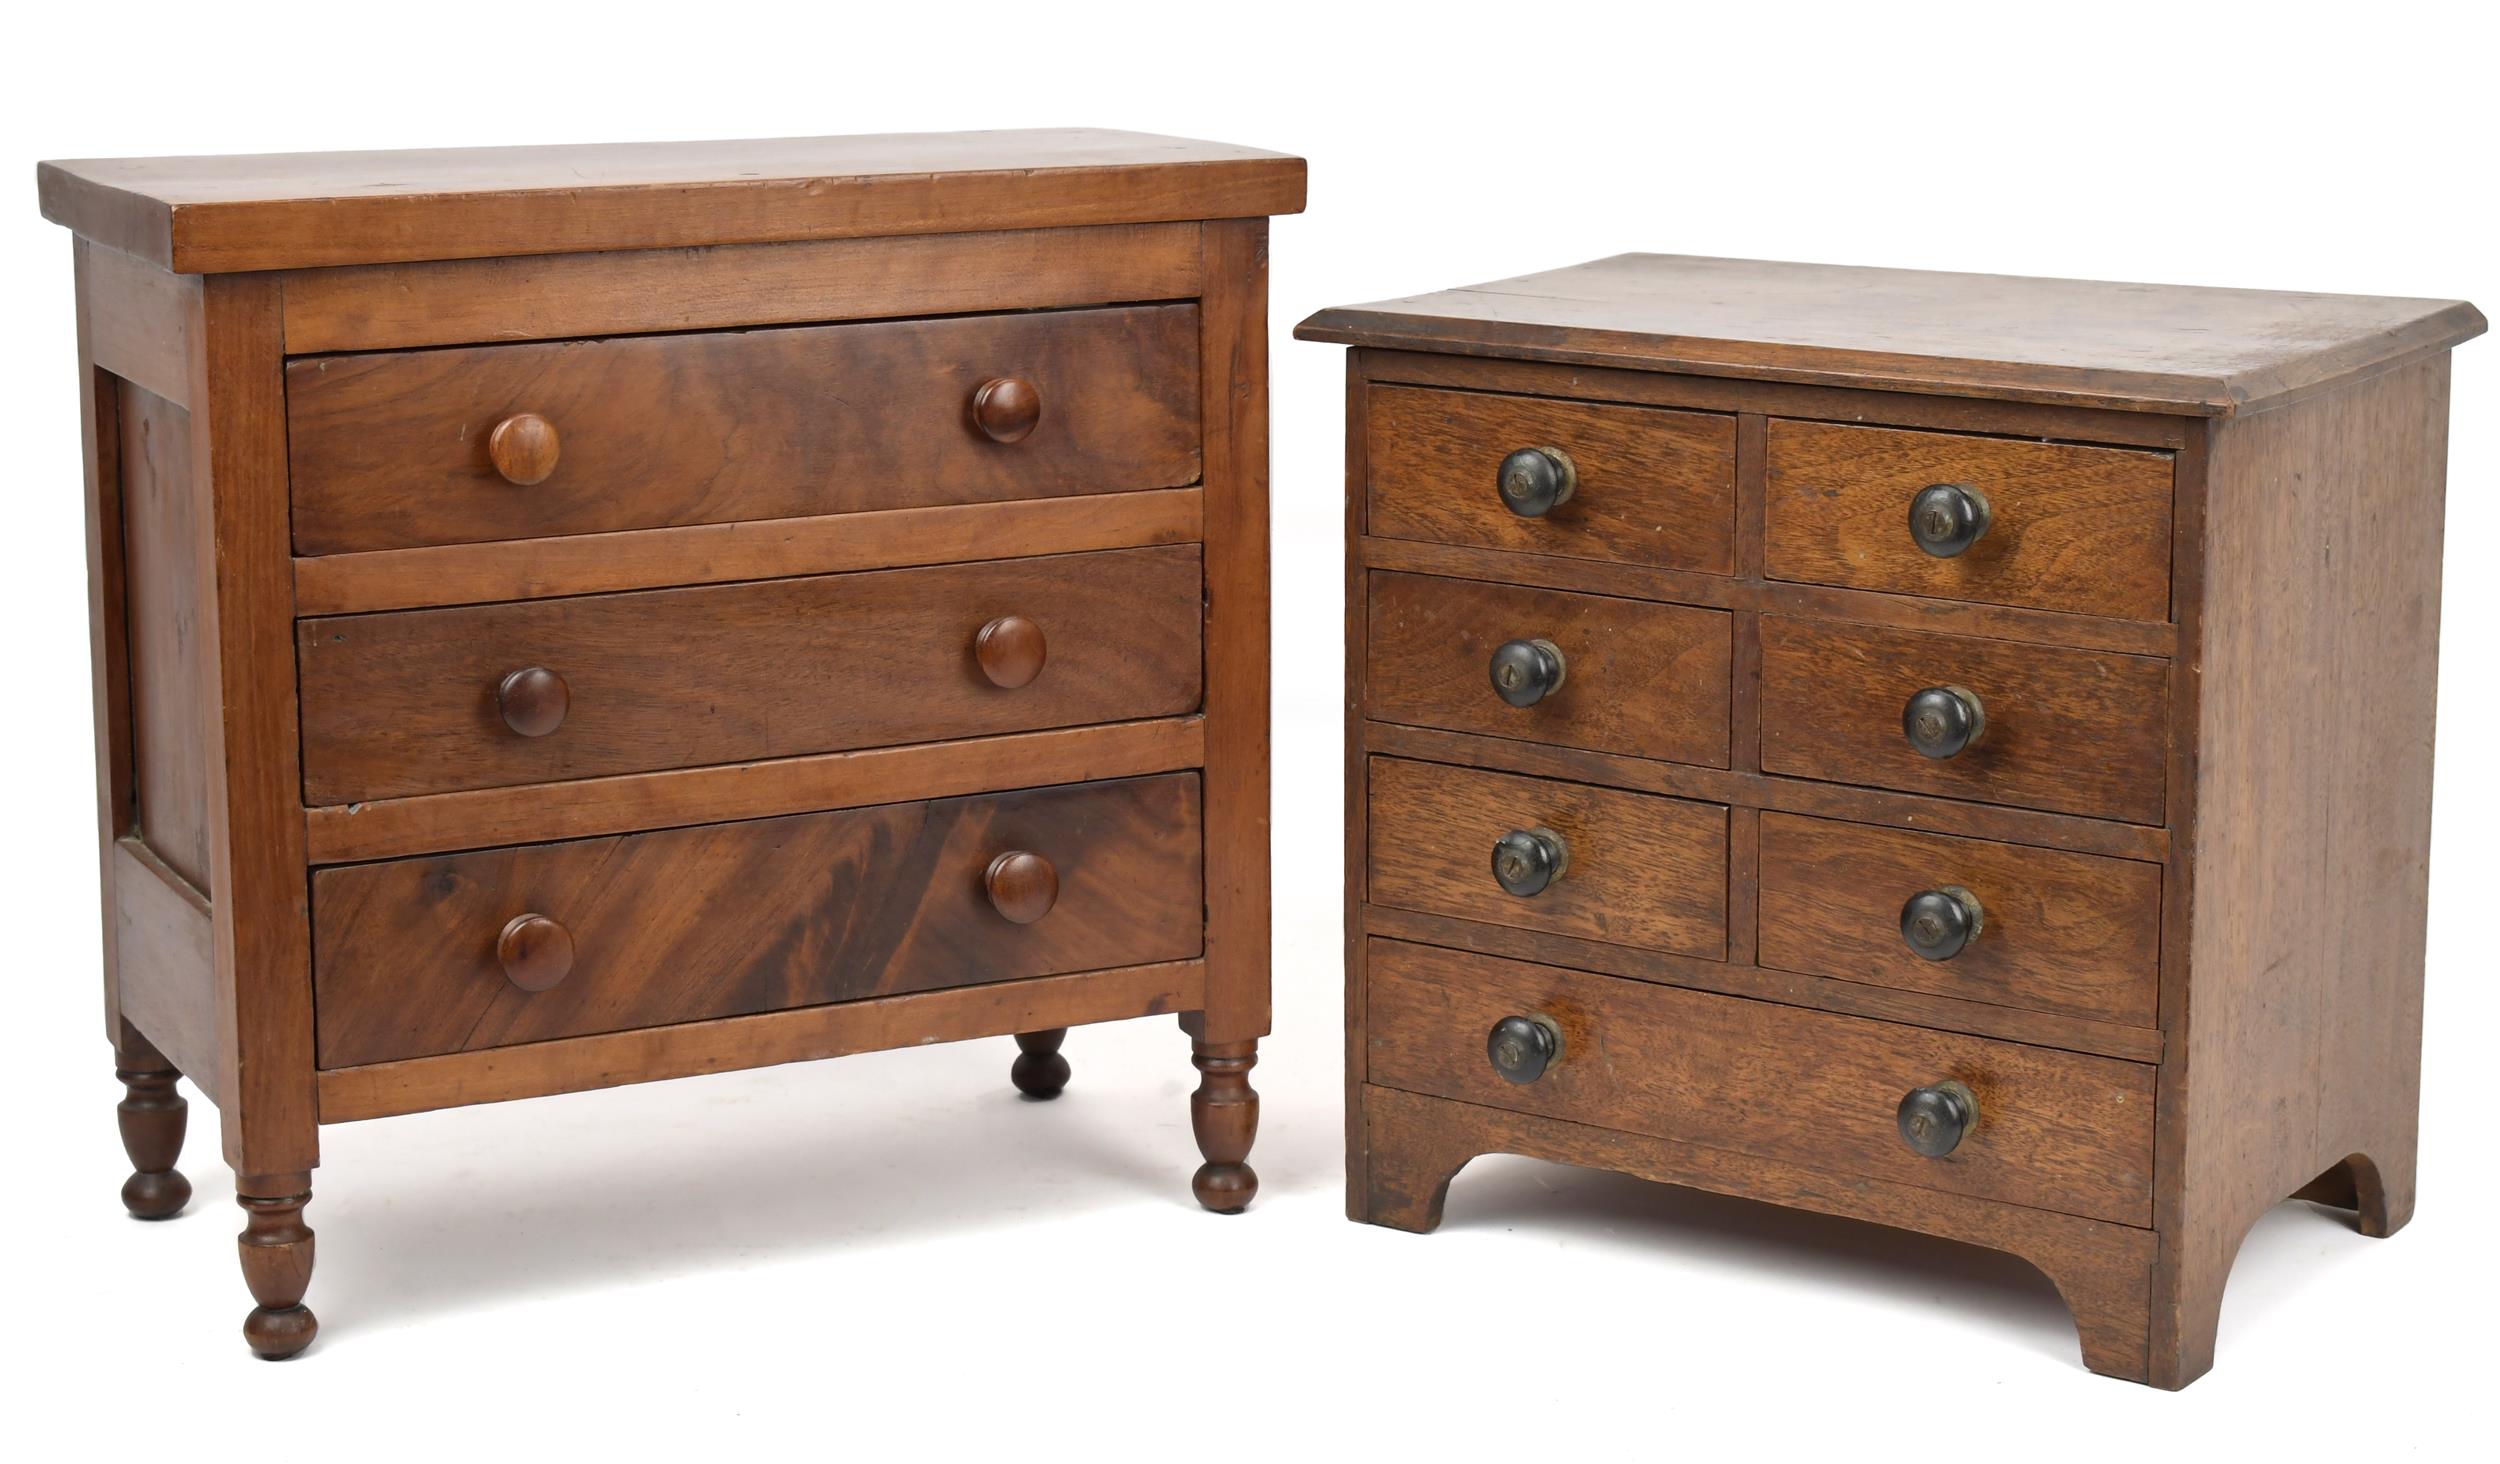 TWO 19TH C. CHILDS CHESTS. Ca.